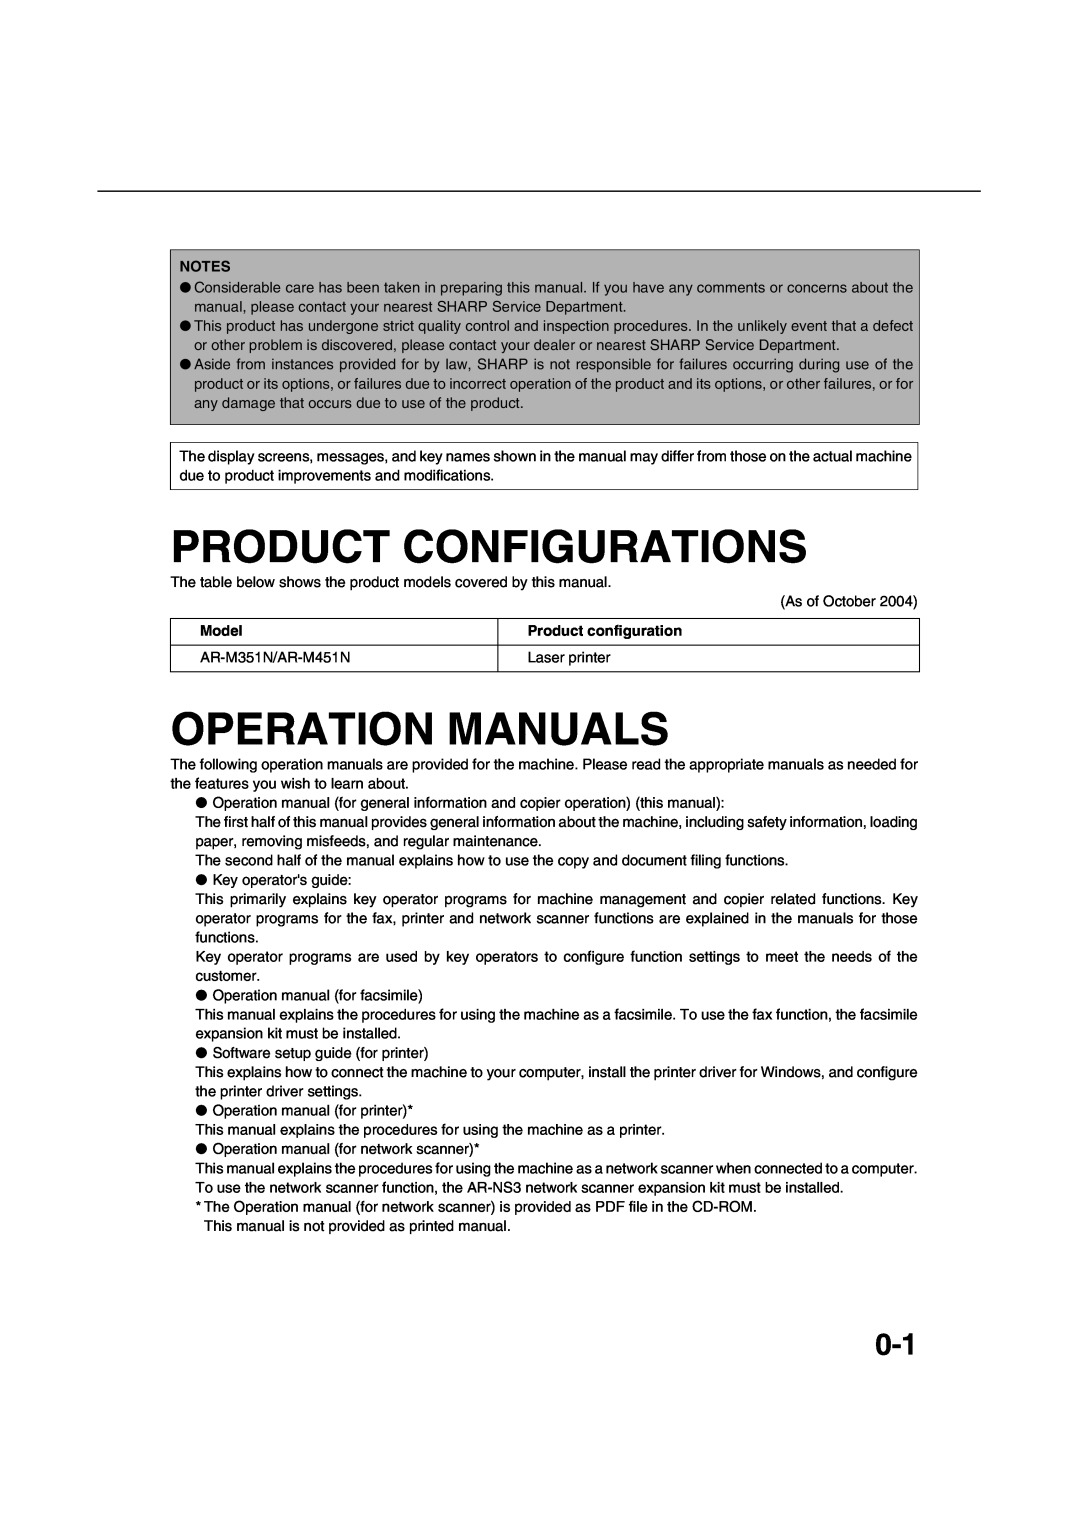 Sharp Product Configurations, Operation Manuals, Model, Product configuration, AR-M351N/AR-M451N, Laser printer 